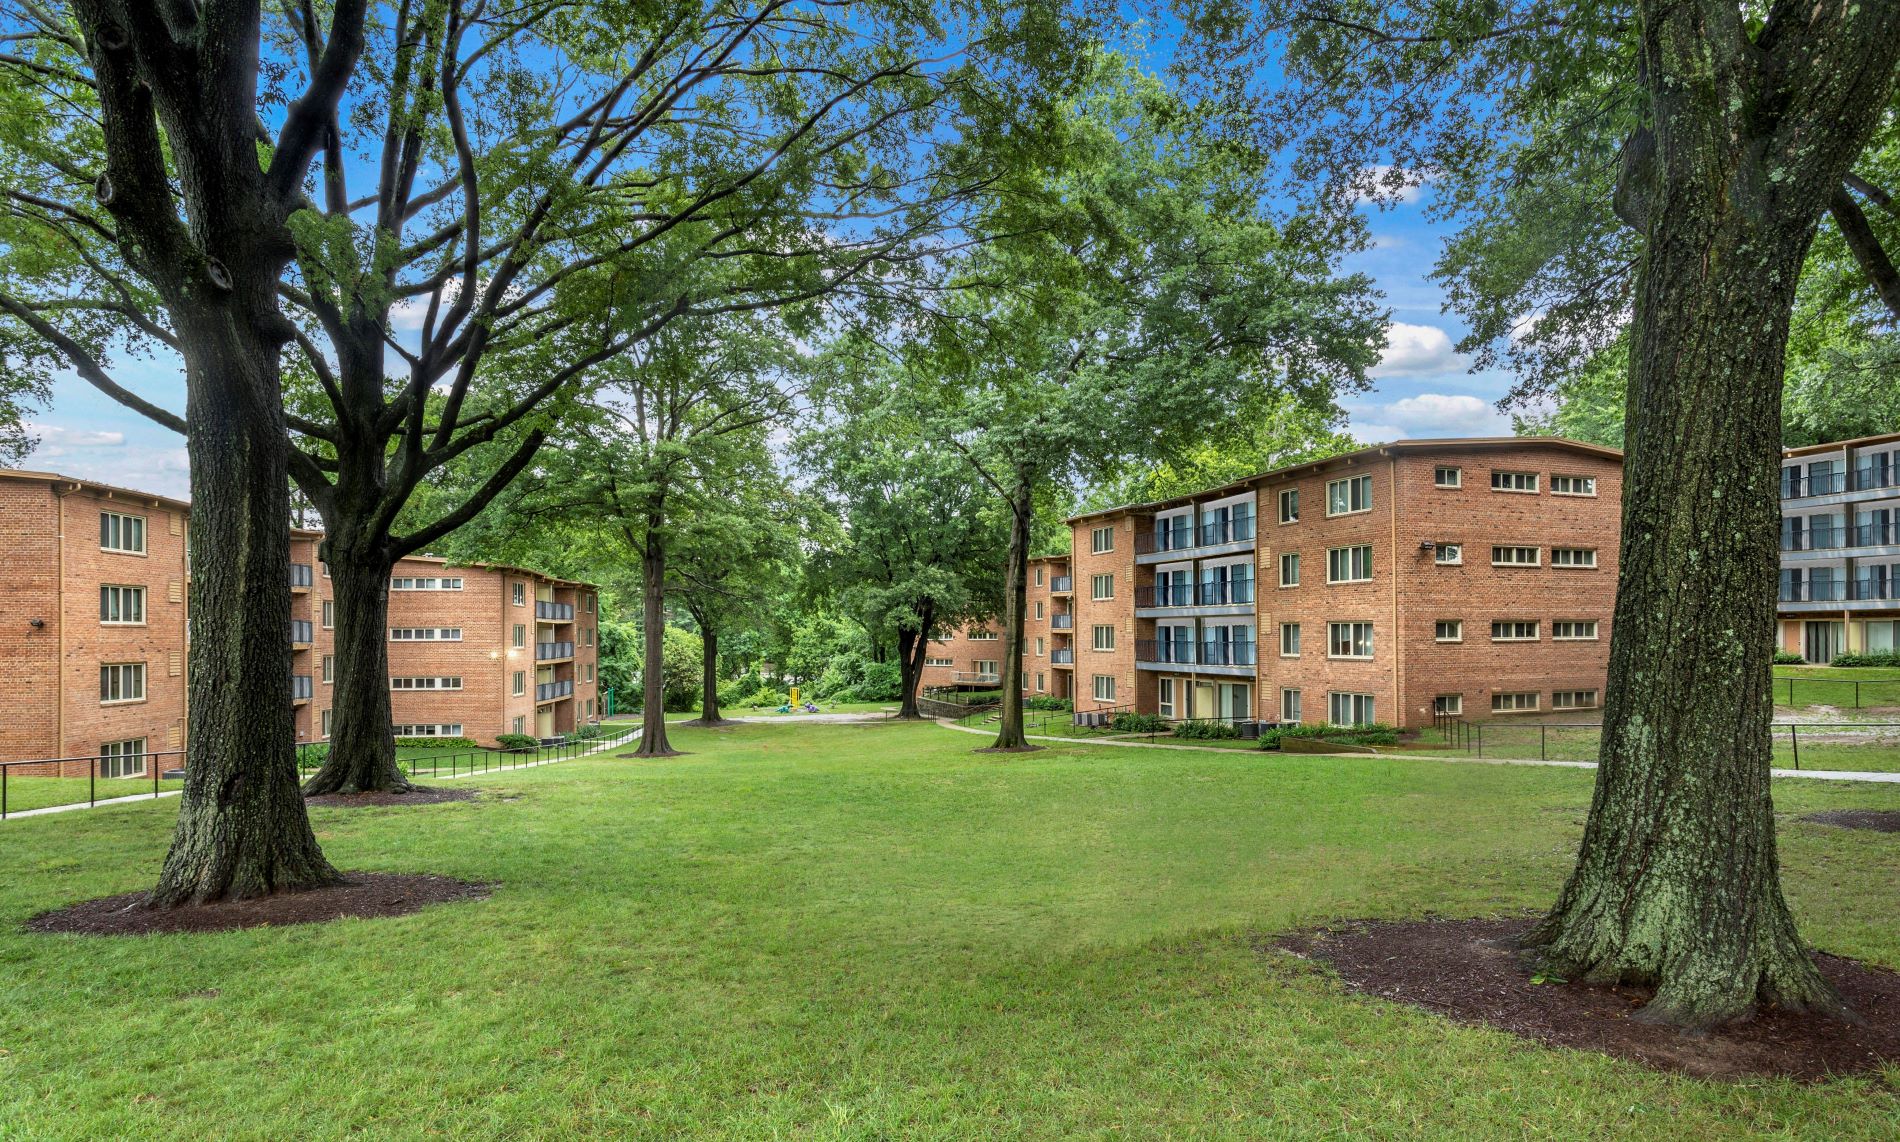 Spacious Green Space in Flower Branch Apartments